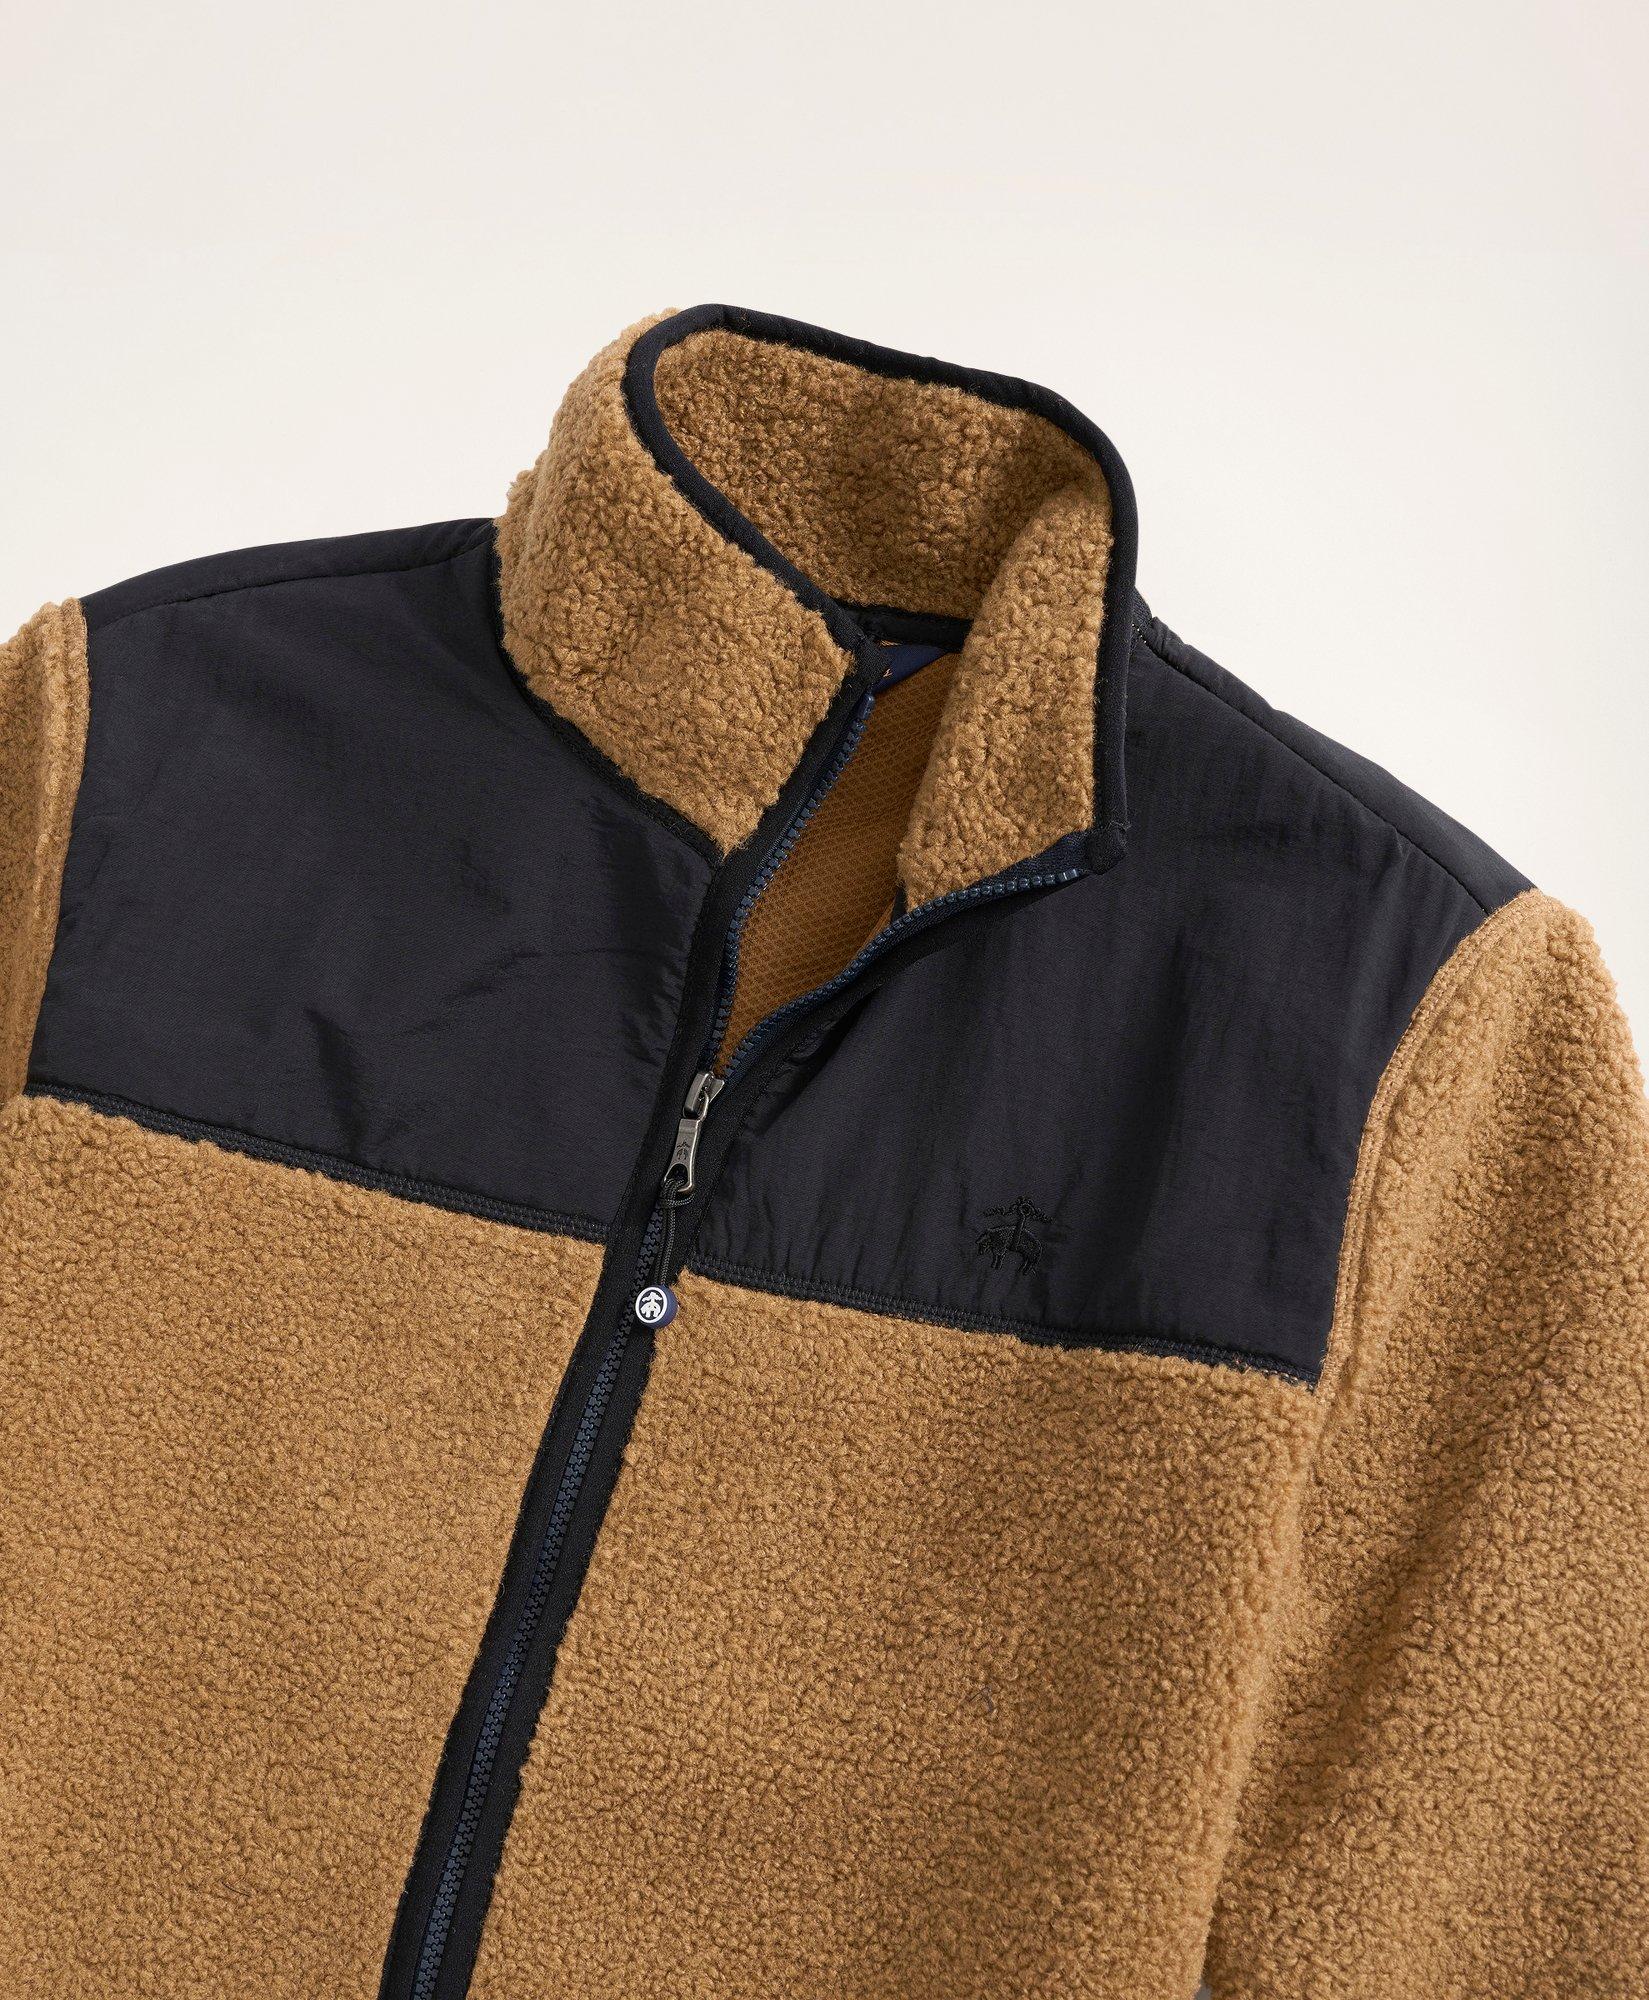 Brooks Brothers Boys Teddy Fleece Zip Jacket | Olive | Size Xs - Shop Holiday Gifts and Styles